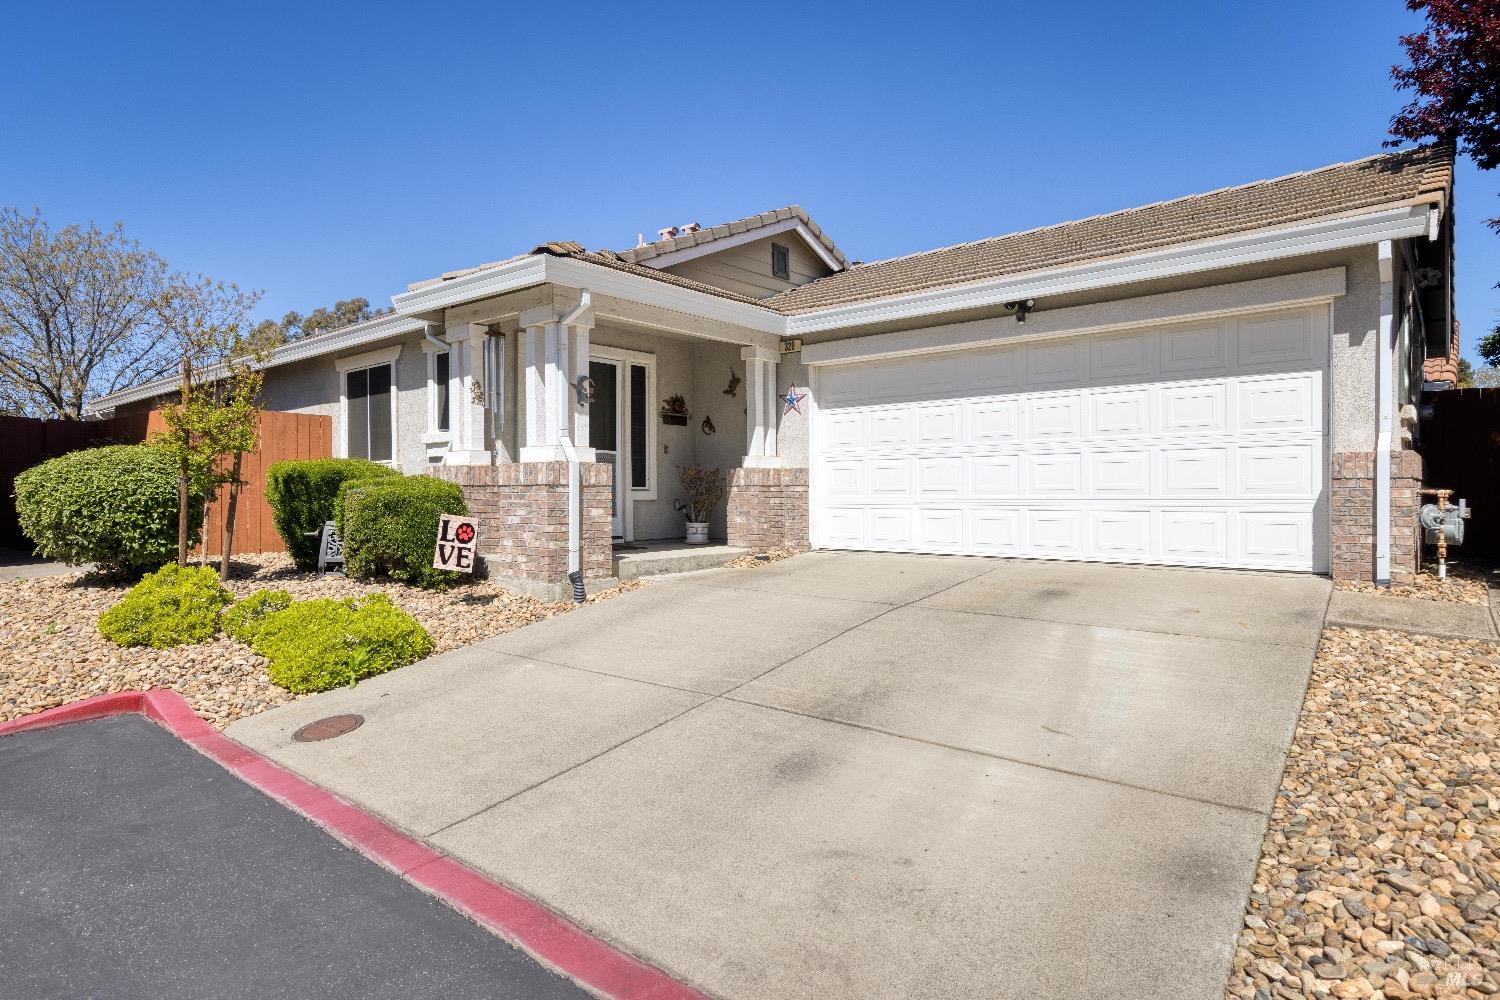 Welcome to 320 Torrey Pines Ct in Vacaville, CAa delightful blend of modern convenience and timeless